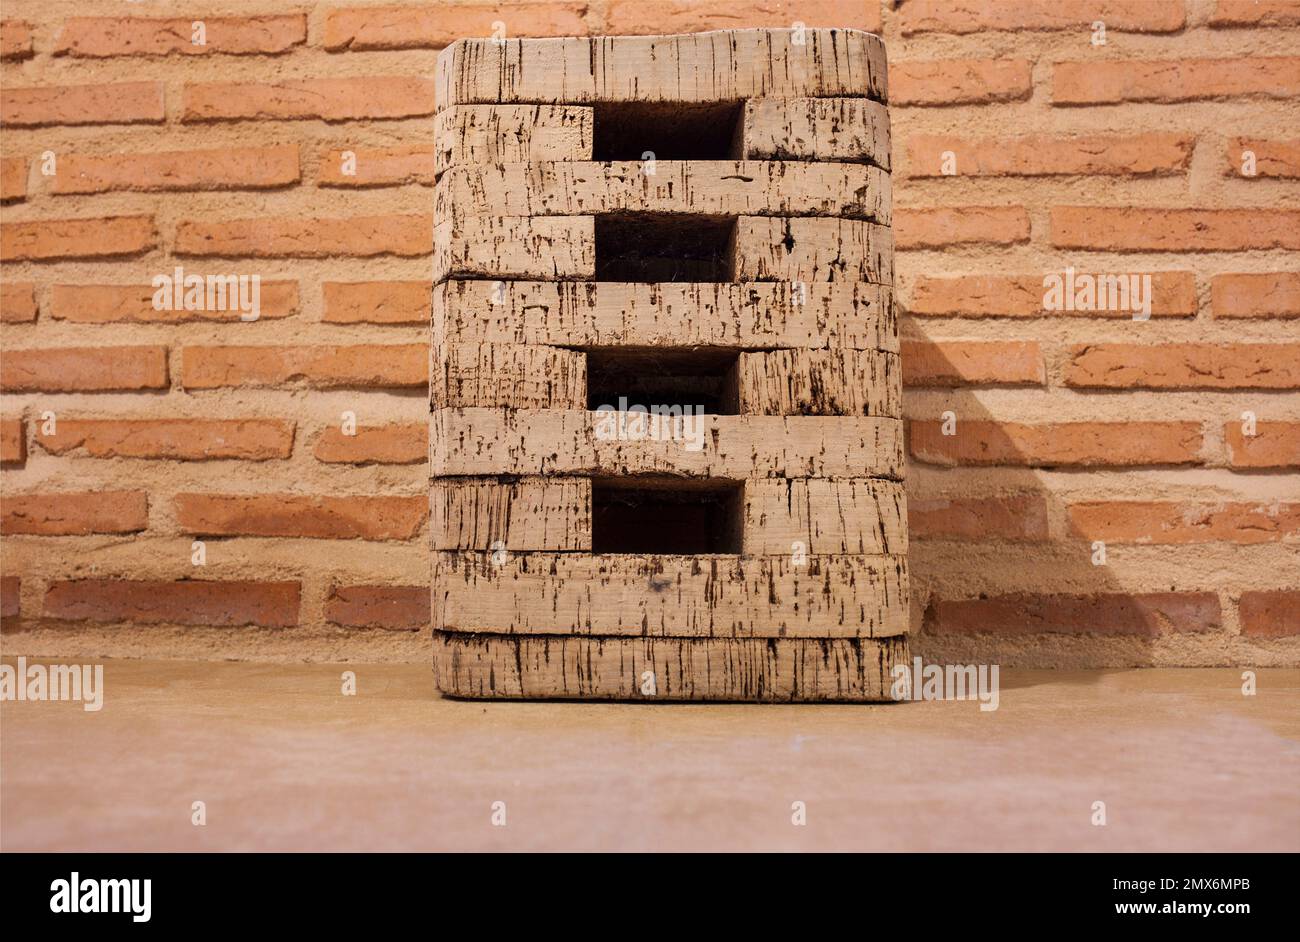 Stump stool made of cork also senton. Rustic home design from Extremadura, Spain. Stock Photo